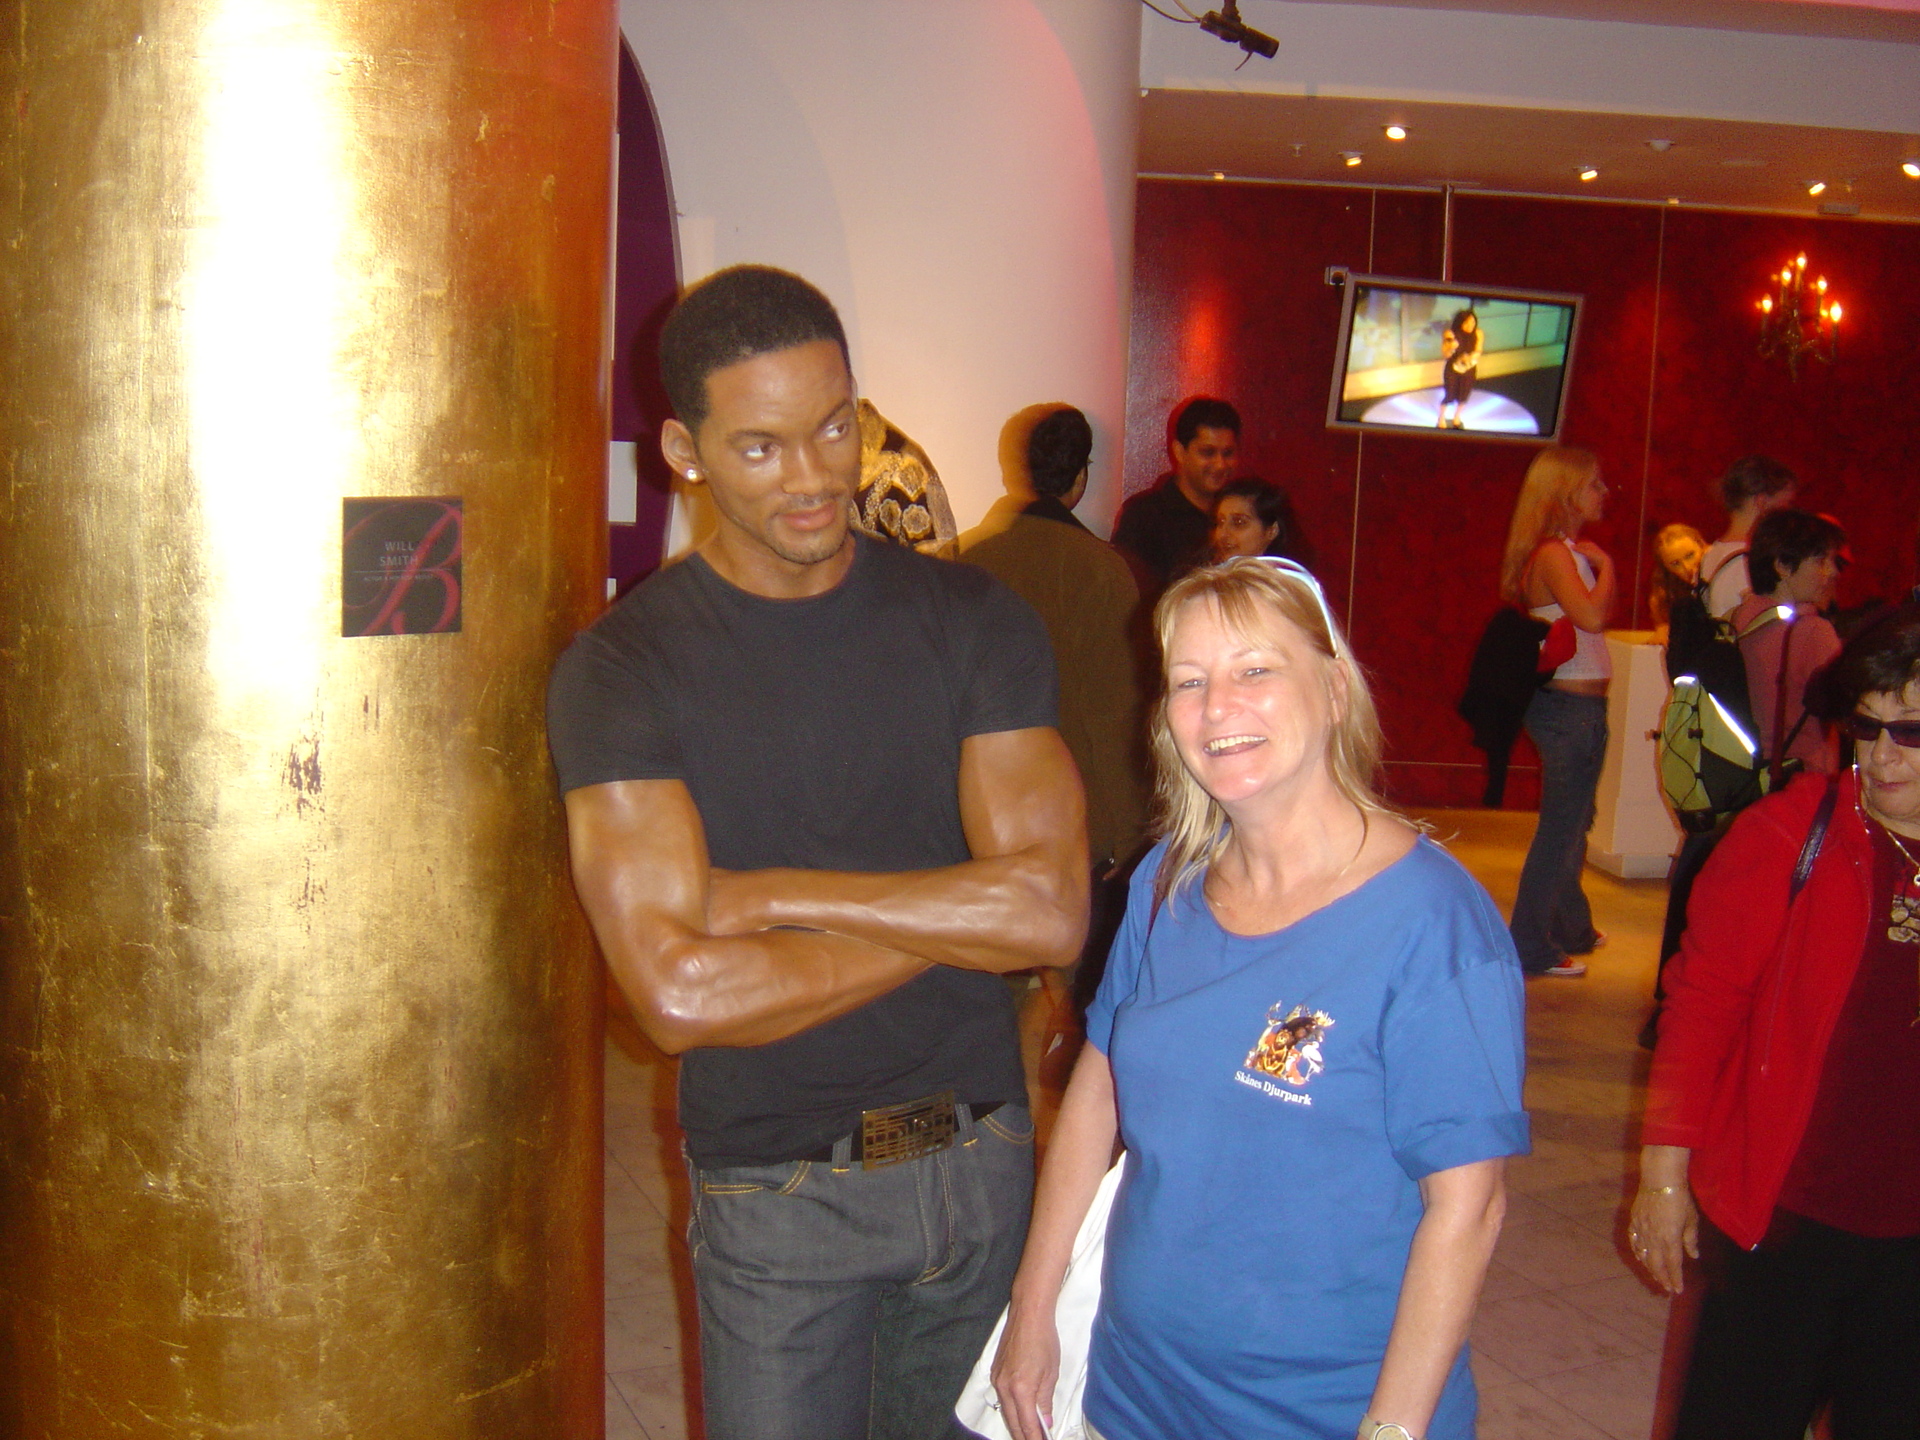 Madame Tussaud's in London